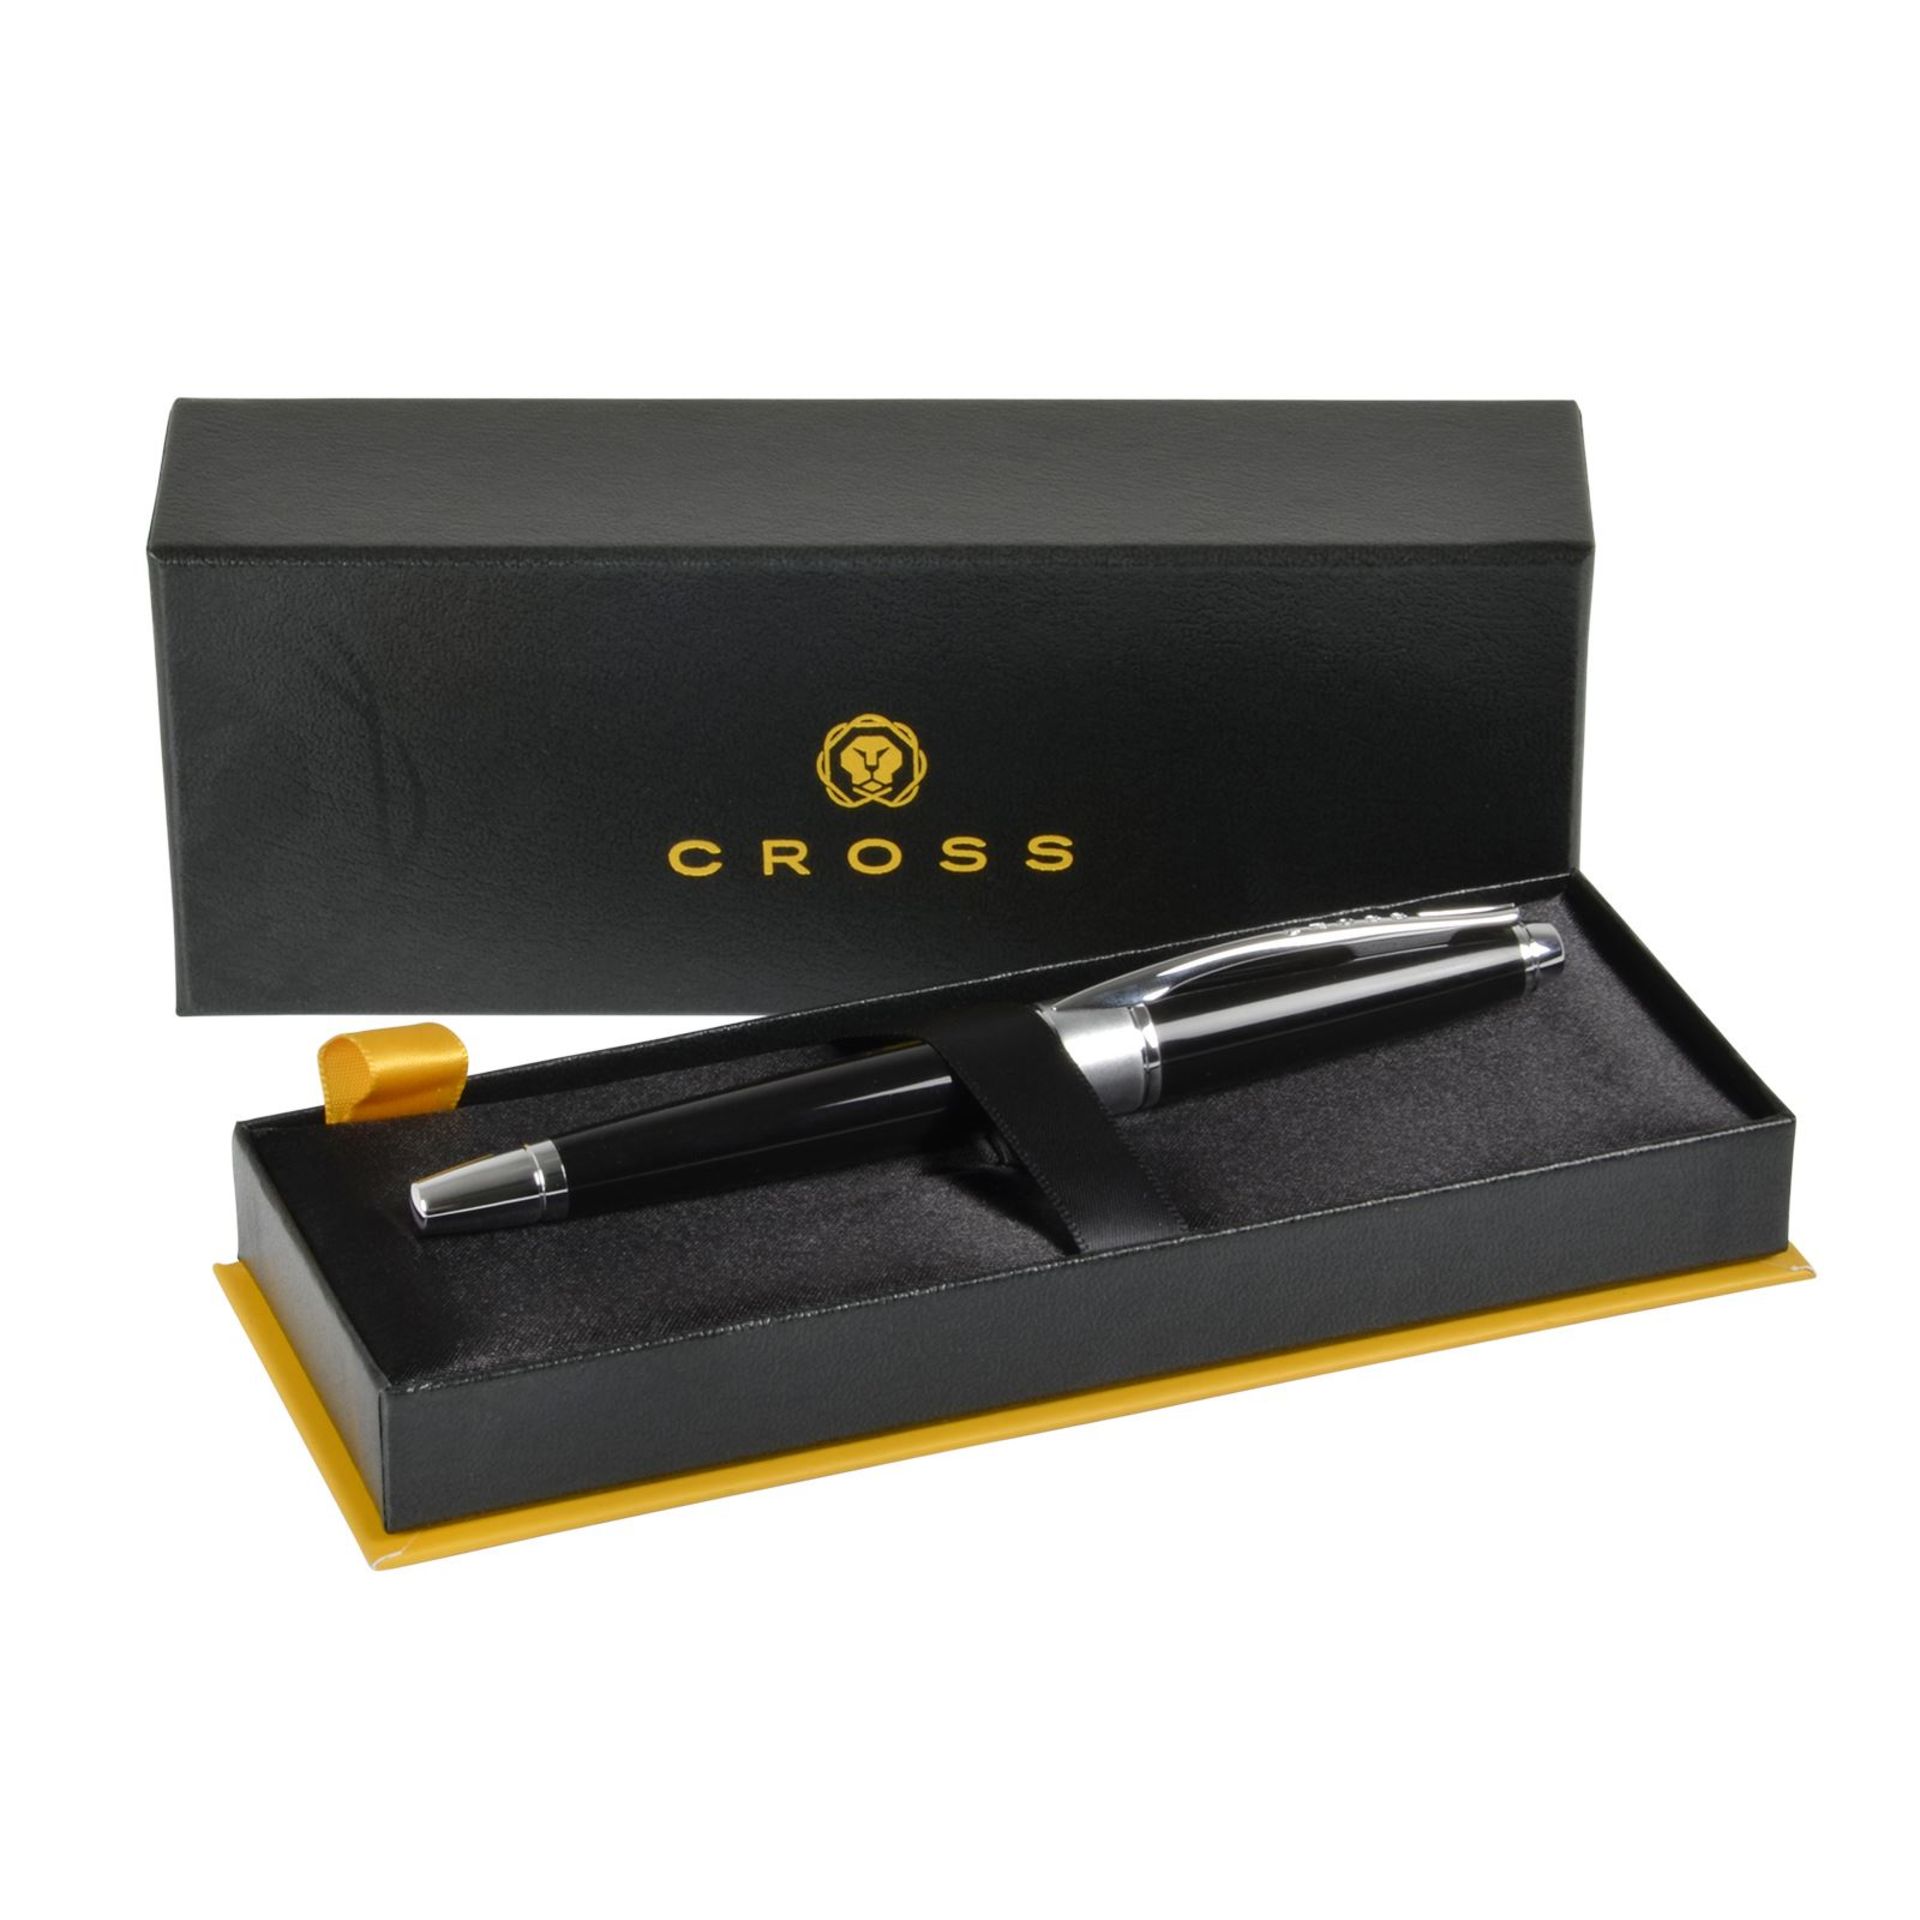 V Brand New Cross Apogee Black Lacquer Rollerball Pen With Chrome Trim In Presentation Box - WH - Image 2 of 2